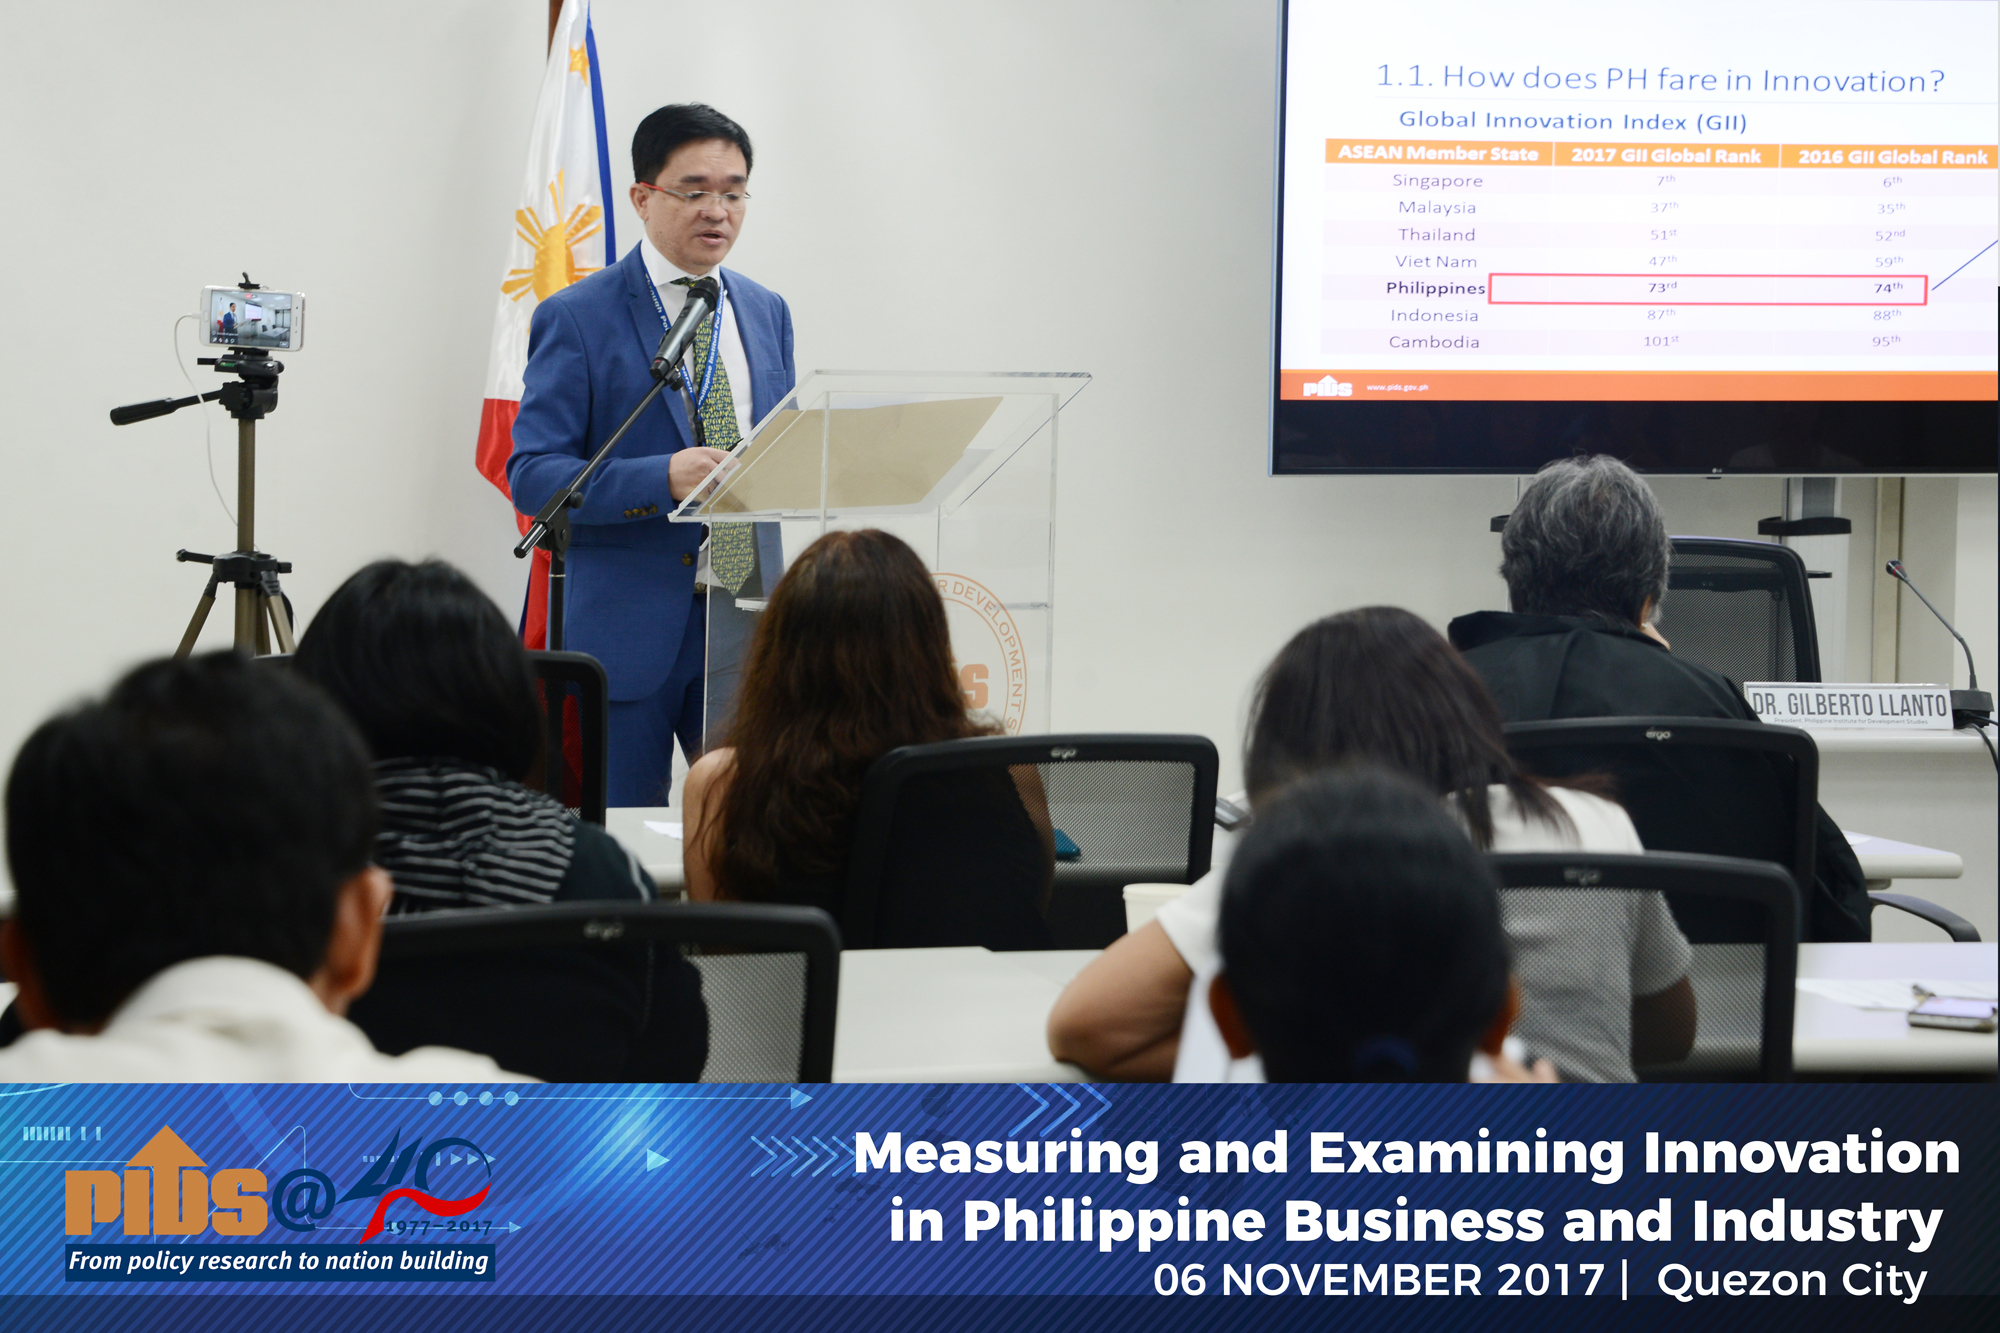 Measuring and Examining Innovation in Philippine Business and Industry-11_06_2017_seminar.jpg